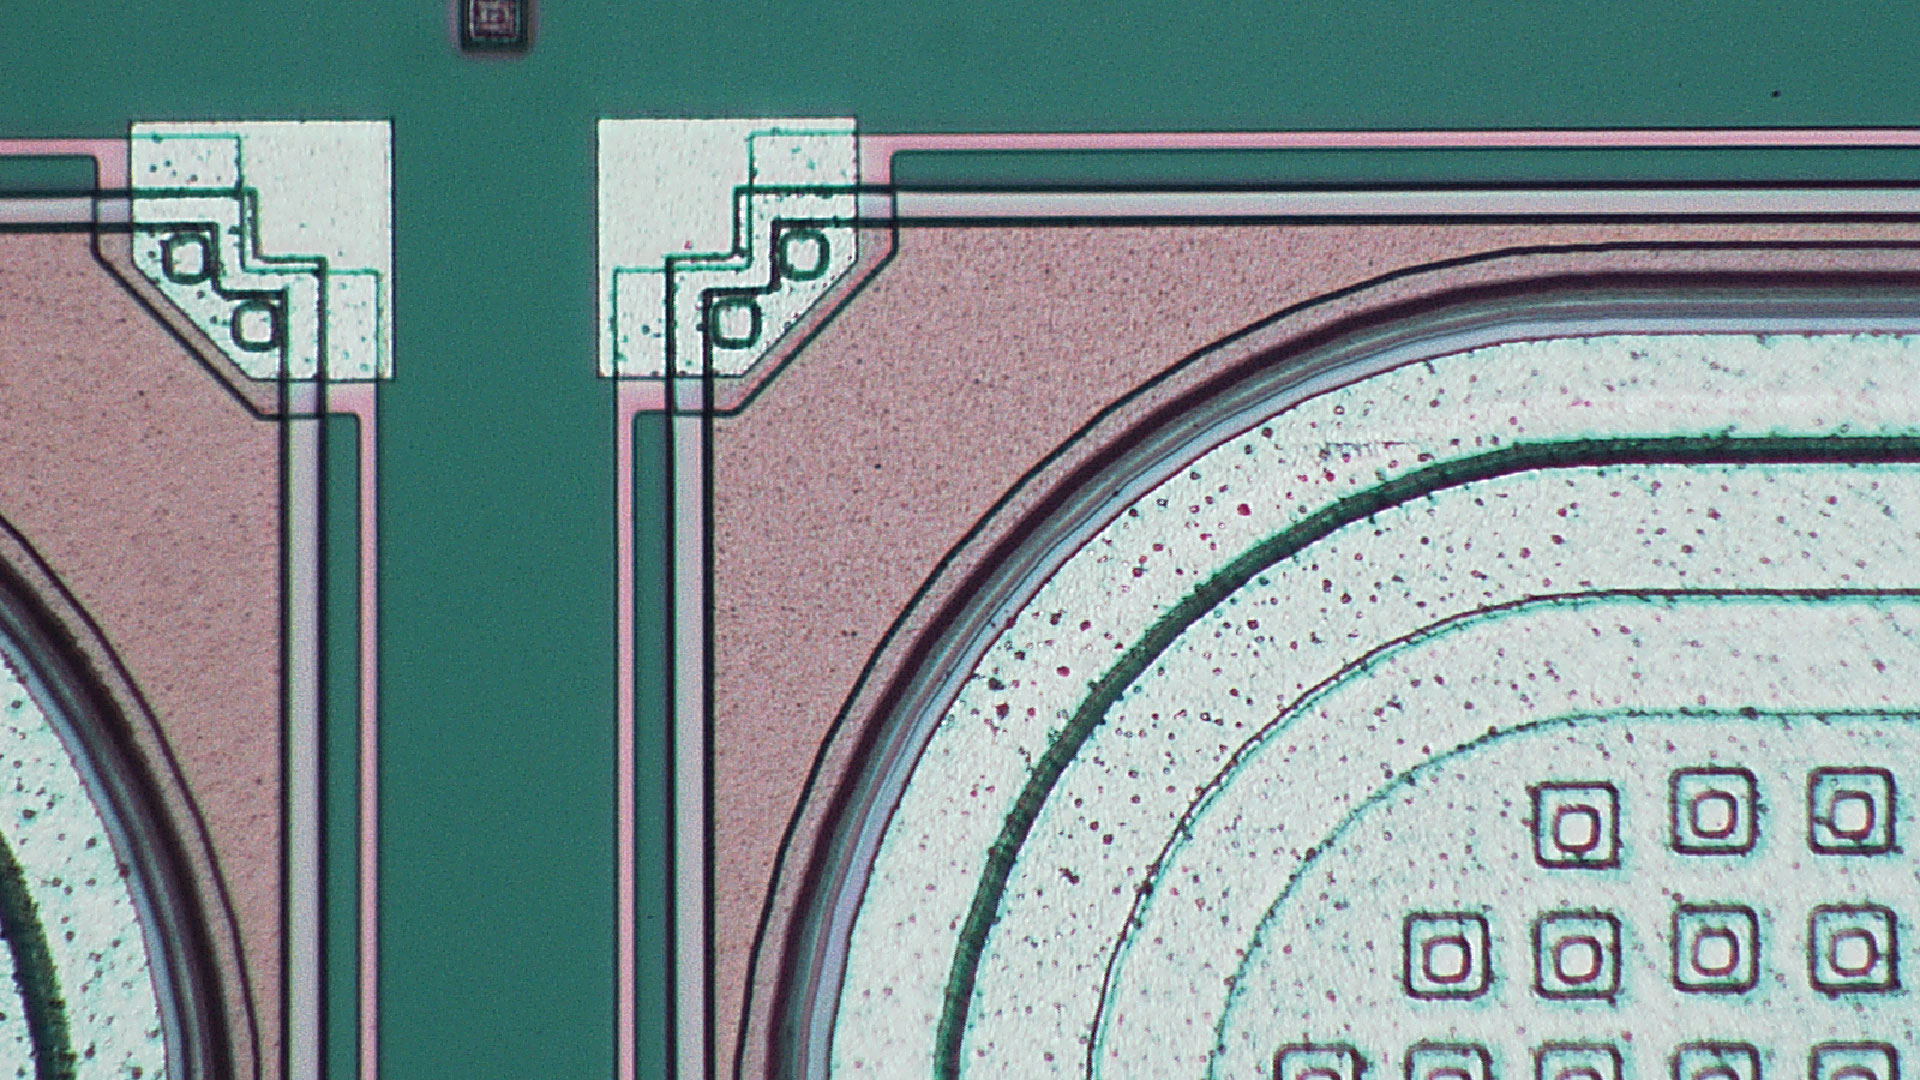 [Translate to chinese:] To better see fine details and defects, a semiconductor material can be inspected using a microscope with various types of lighting. This image was taken with coaxial illumination. 